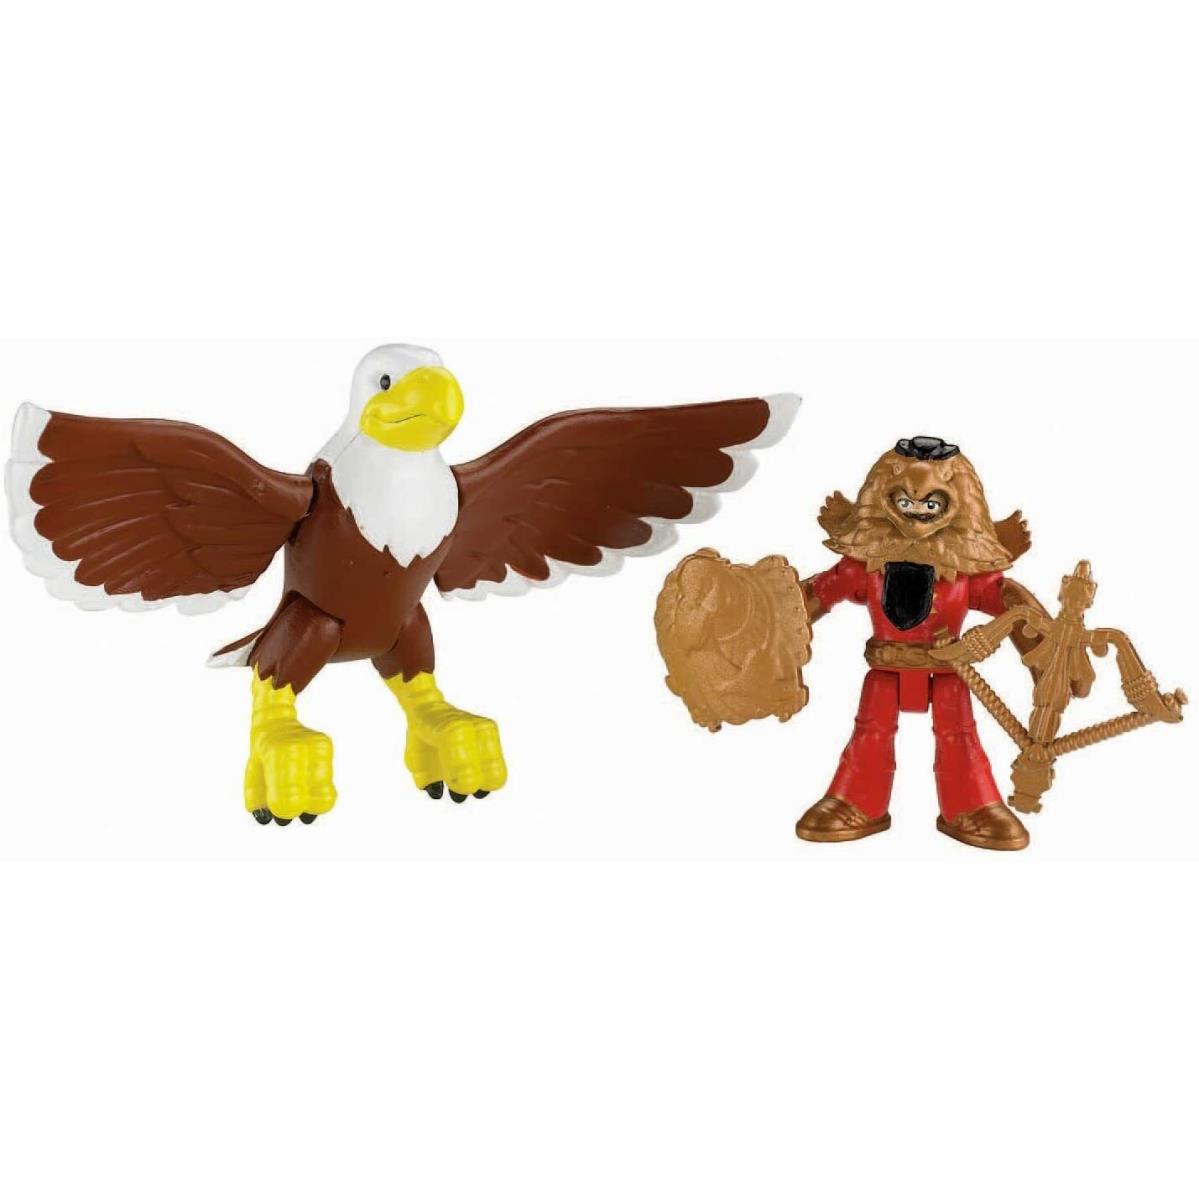 Fisher Price Imaginext Knight and Eagle Toy Figure Set W9548 W9545